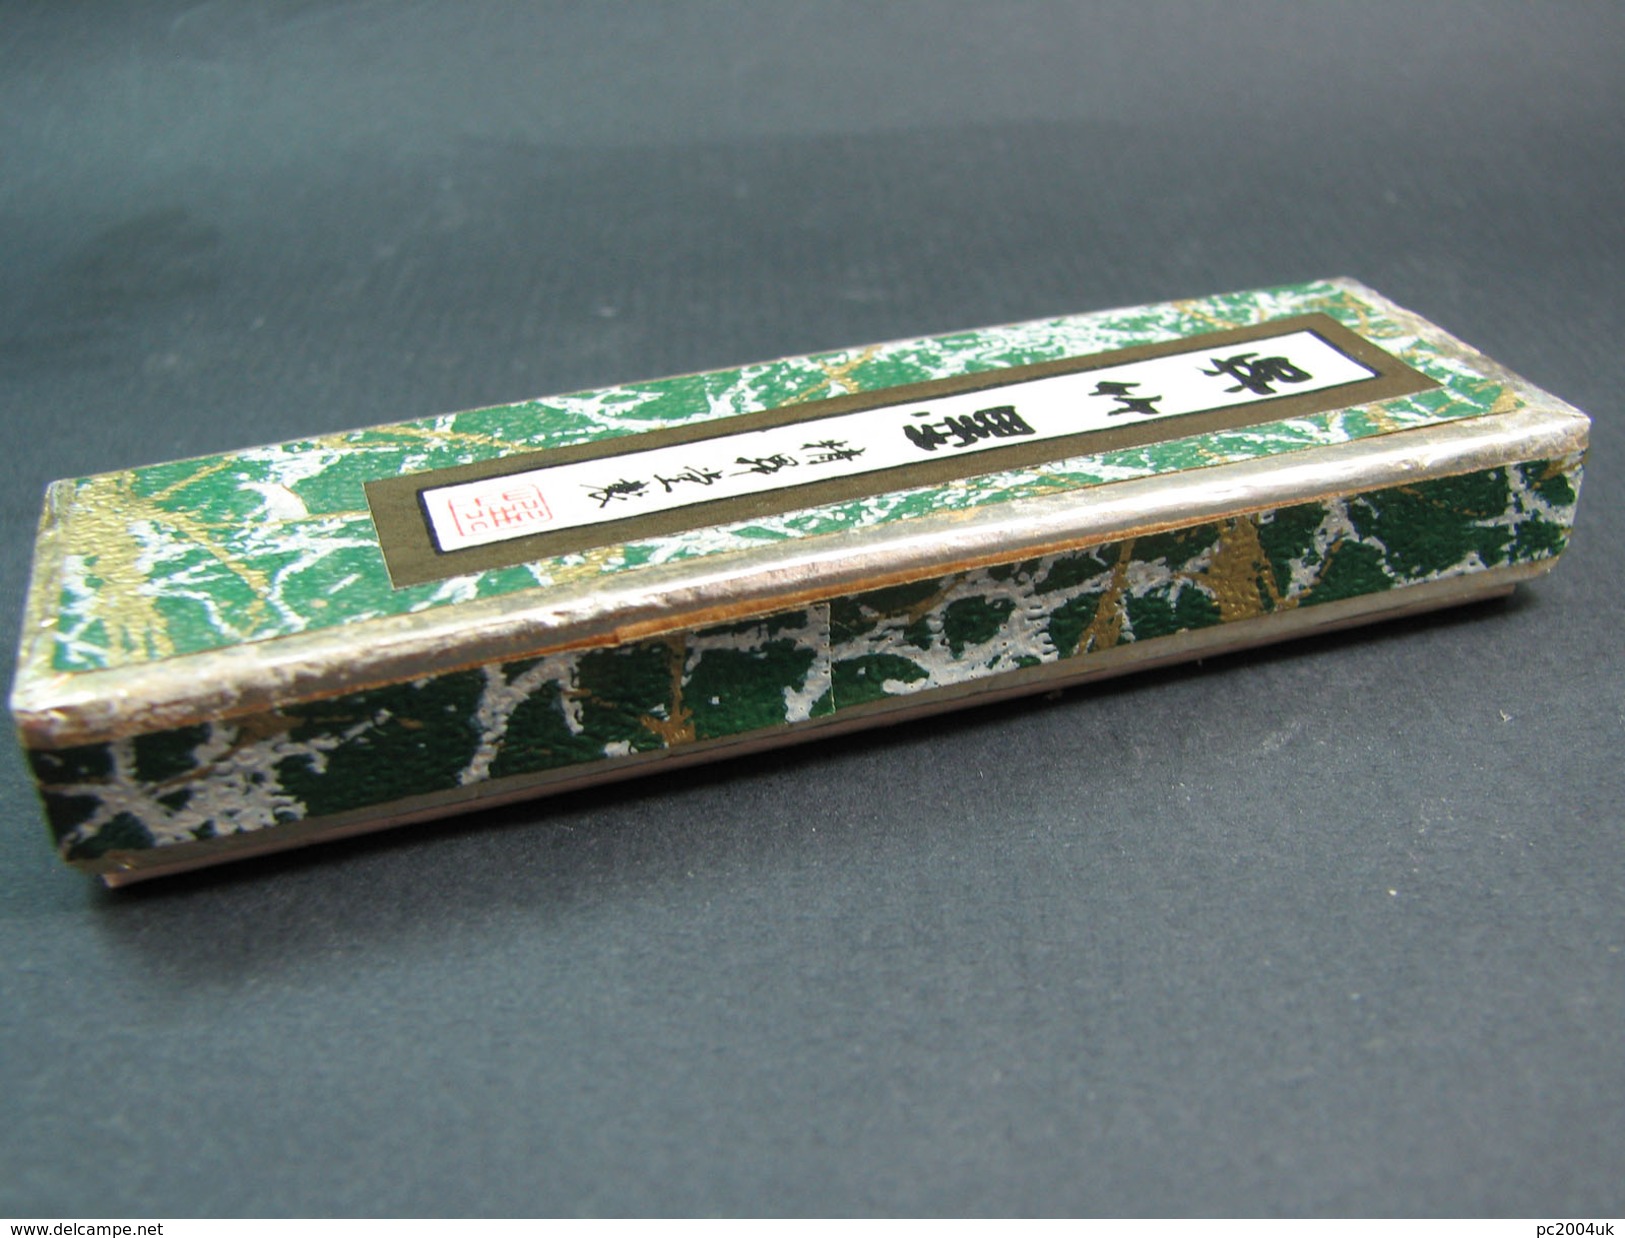 FREE SHIPPING. Four boxed and decorated vintage ink sticks - China/Japan - Circa 1960's.  FREE SHIPPING.